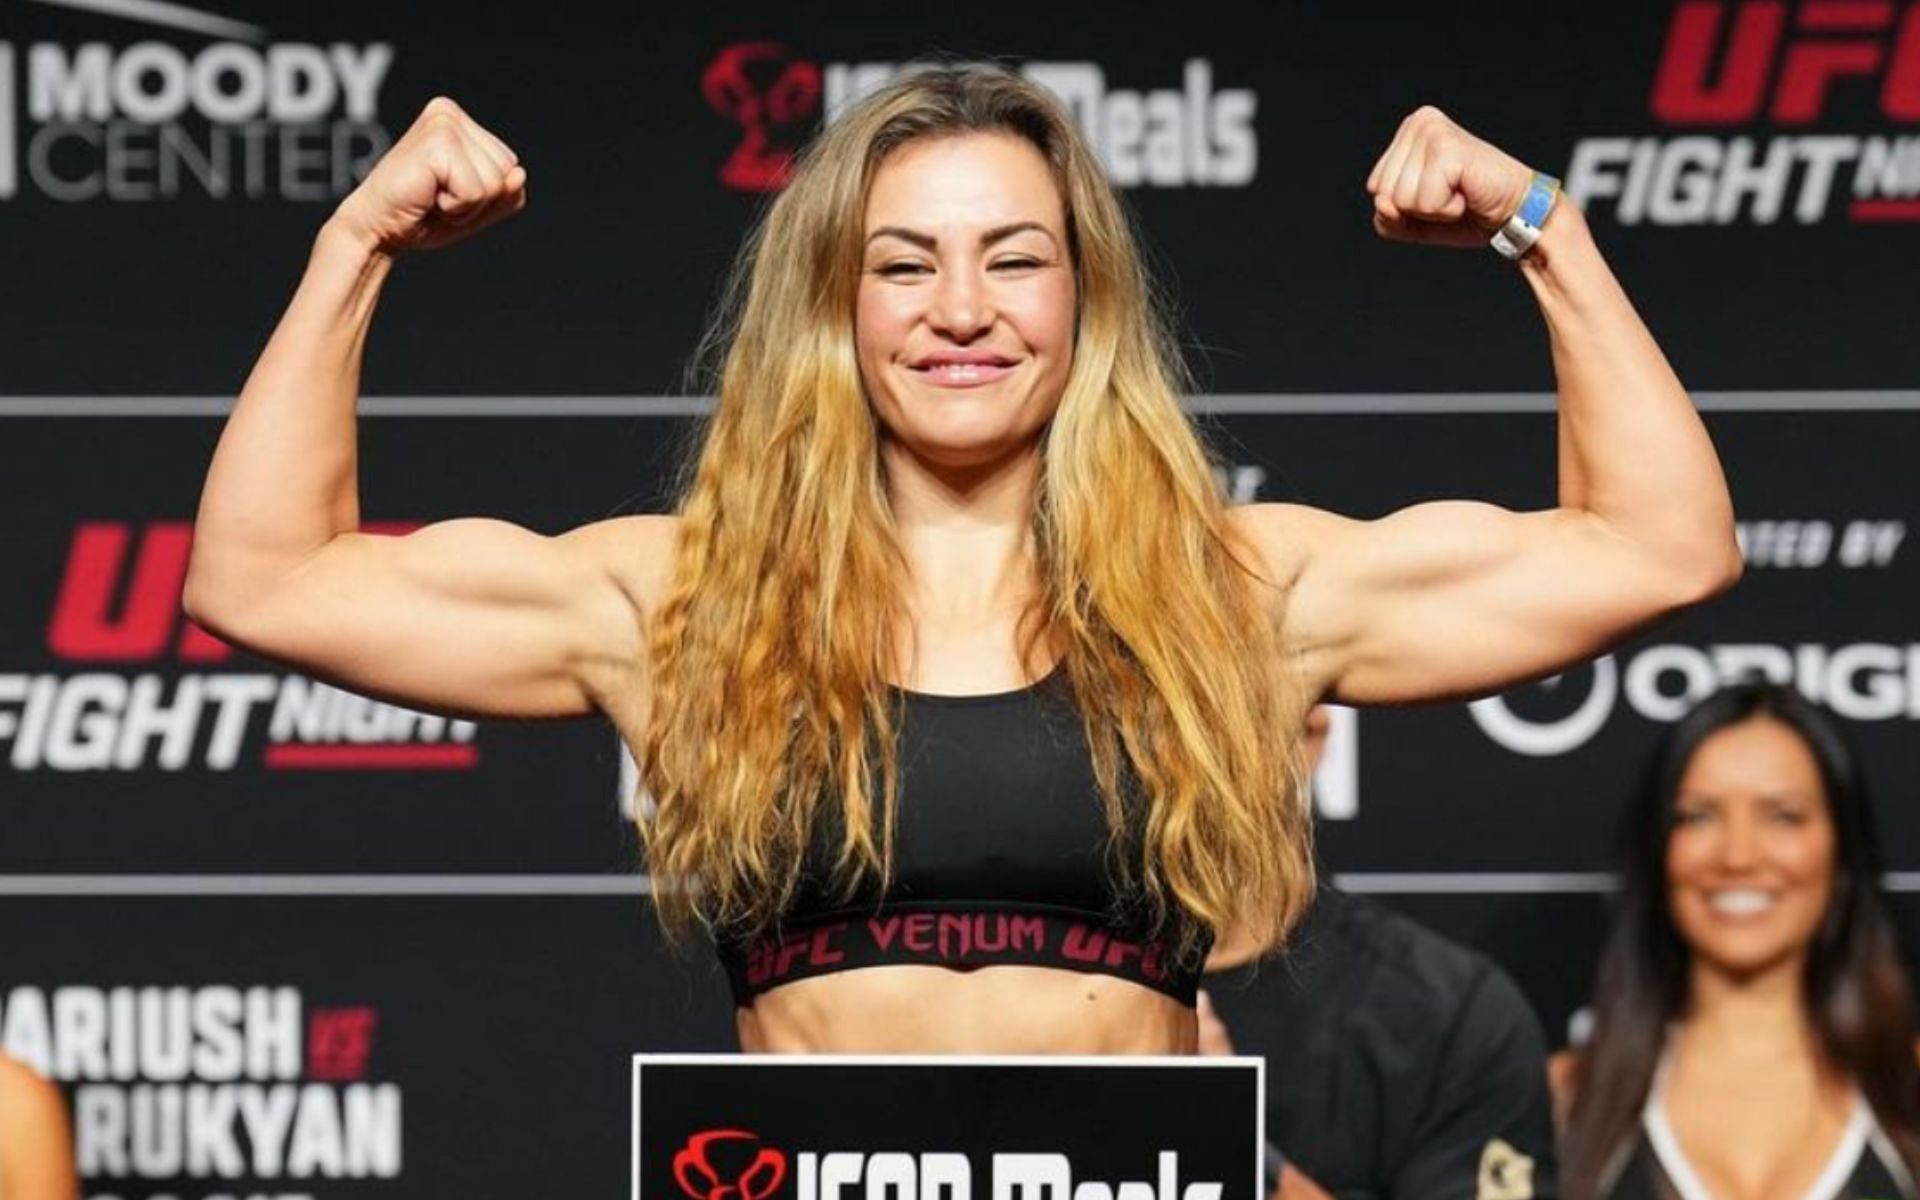 Miesha Tate weighing in at UFC Austin [Photo Courtesy @mieshatate on Instagram]